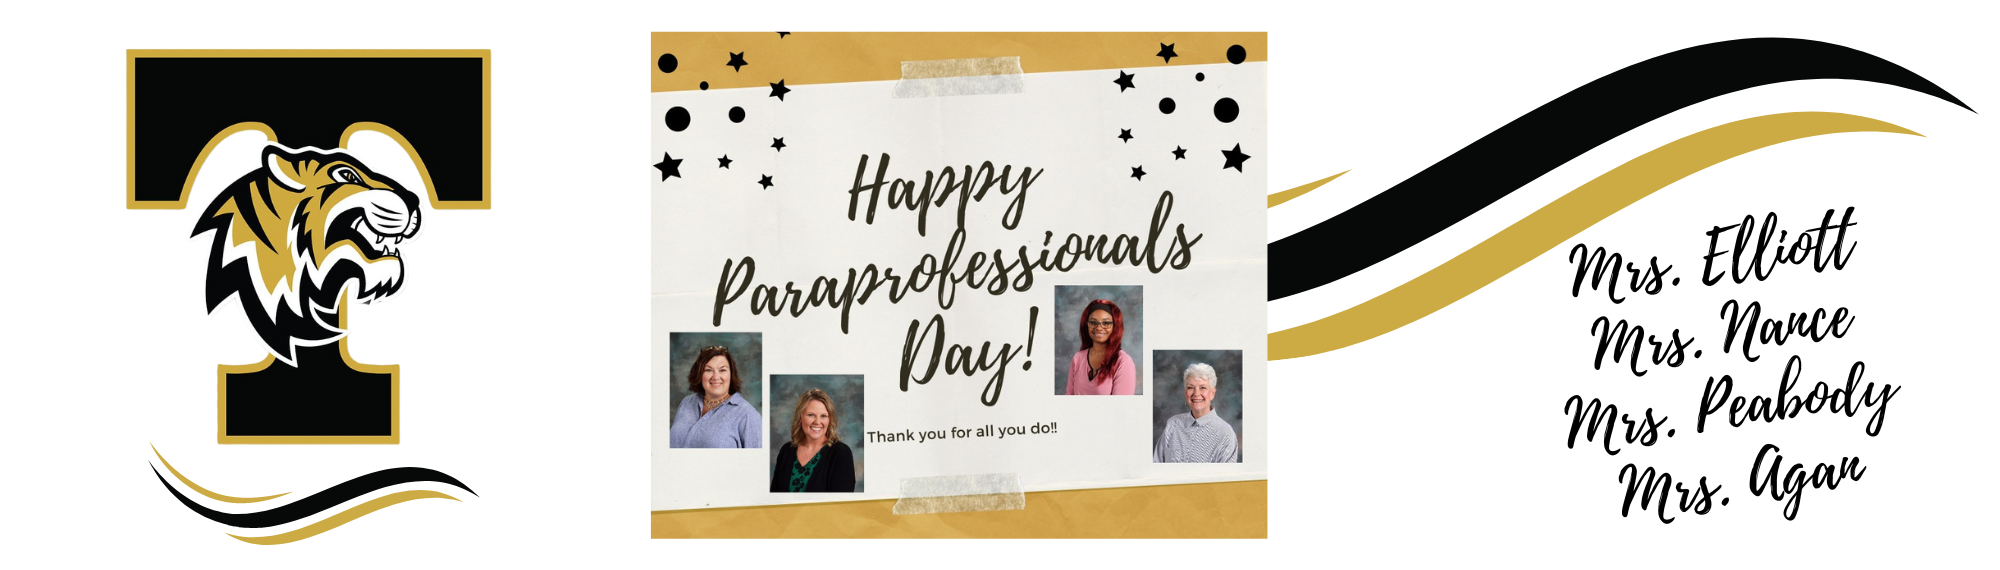 Paraprofessional's Day with Mrs. Elliott, Mrs. Nance, Mrs. Peabody, and Mrs. Agan